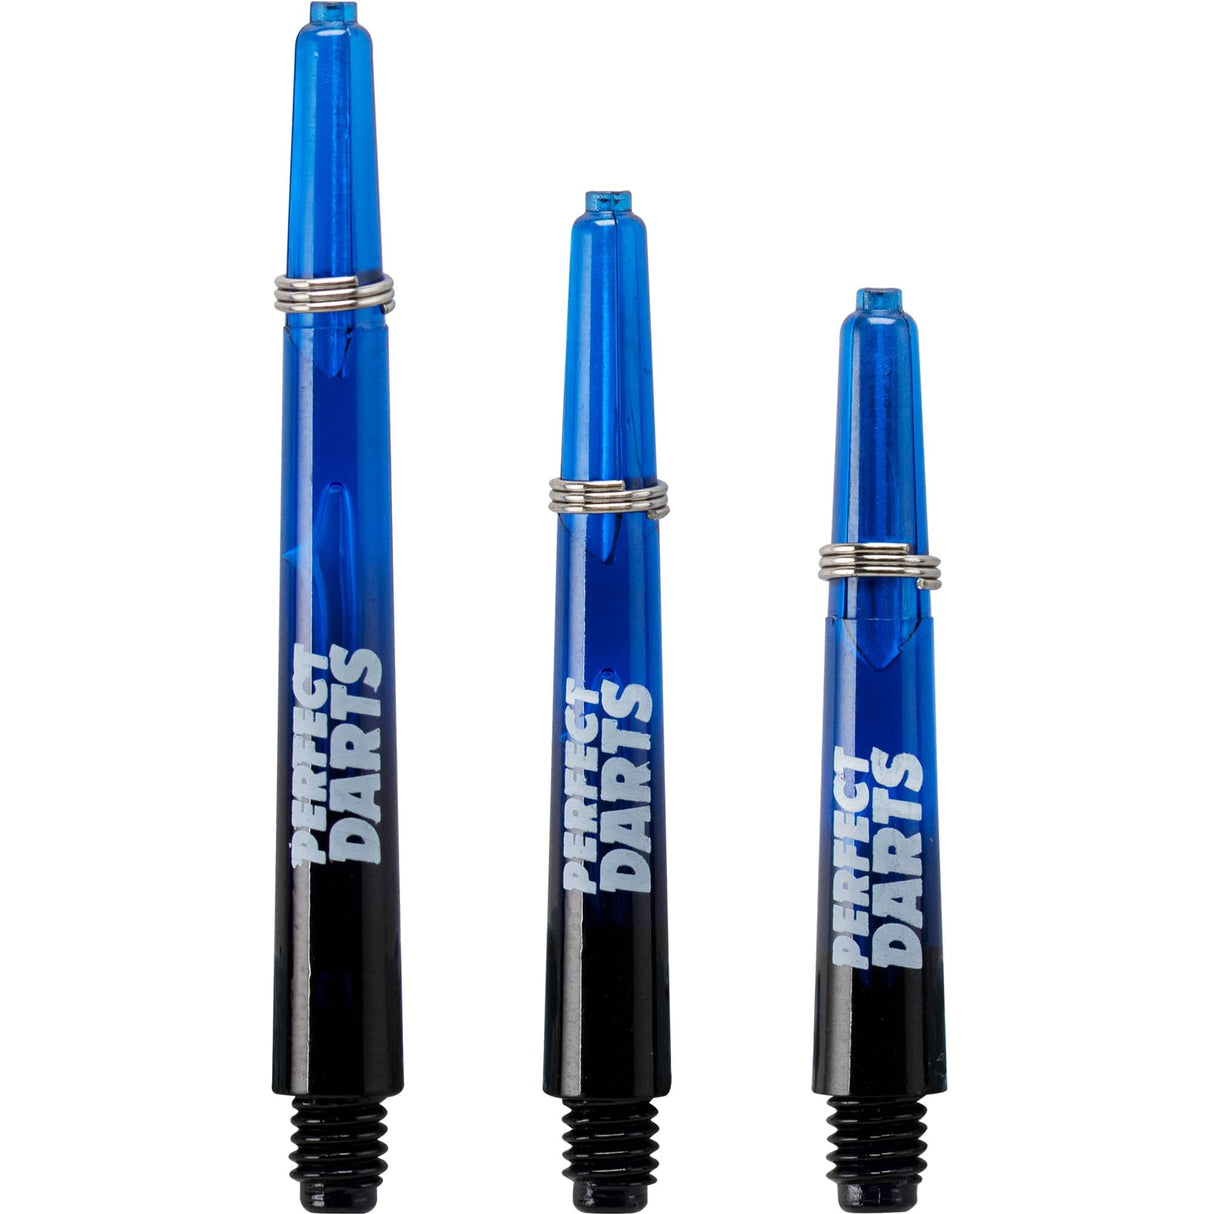 Perfect Darts - Two Tone Shafts - Polycarbonate - Black & Blue - 3 Sets Pack